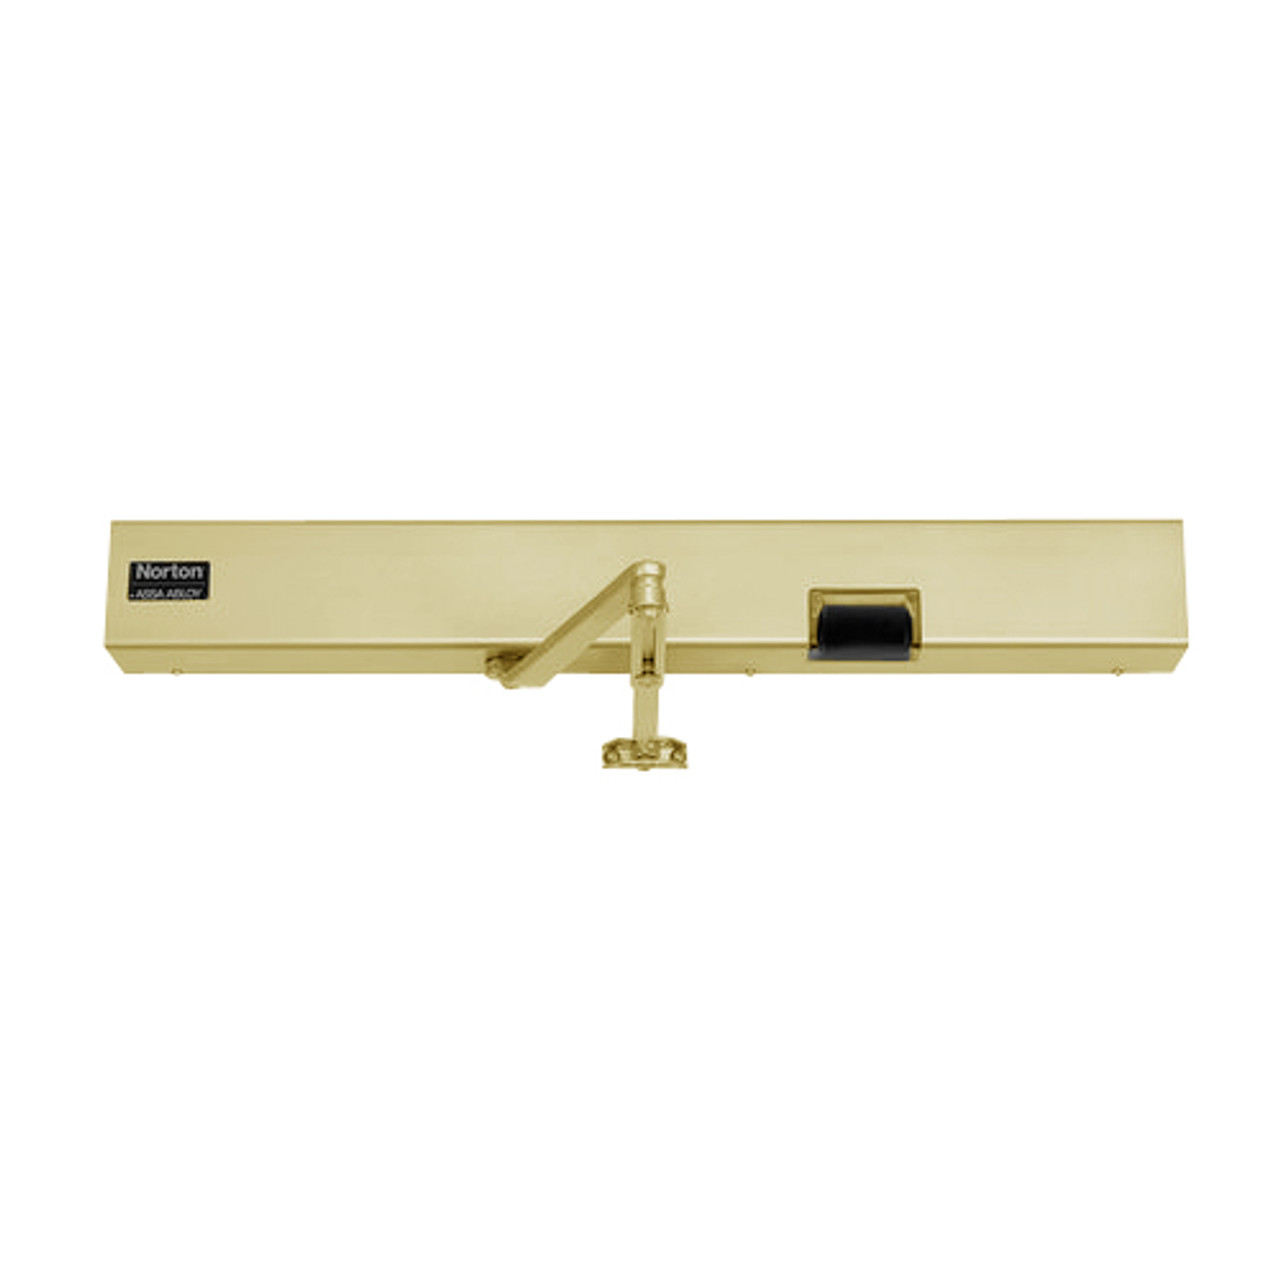 7125SZ-DZ-LH-24VDC-696 Norton 7100SZ Series Safe Zone Multi-Point Closer/Holder with Motion Sensor and Push Side Double Lever 11 inch Main Arm in Gold Finish